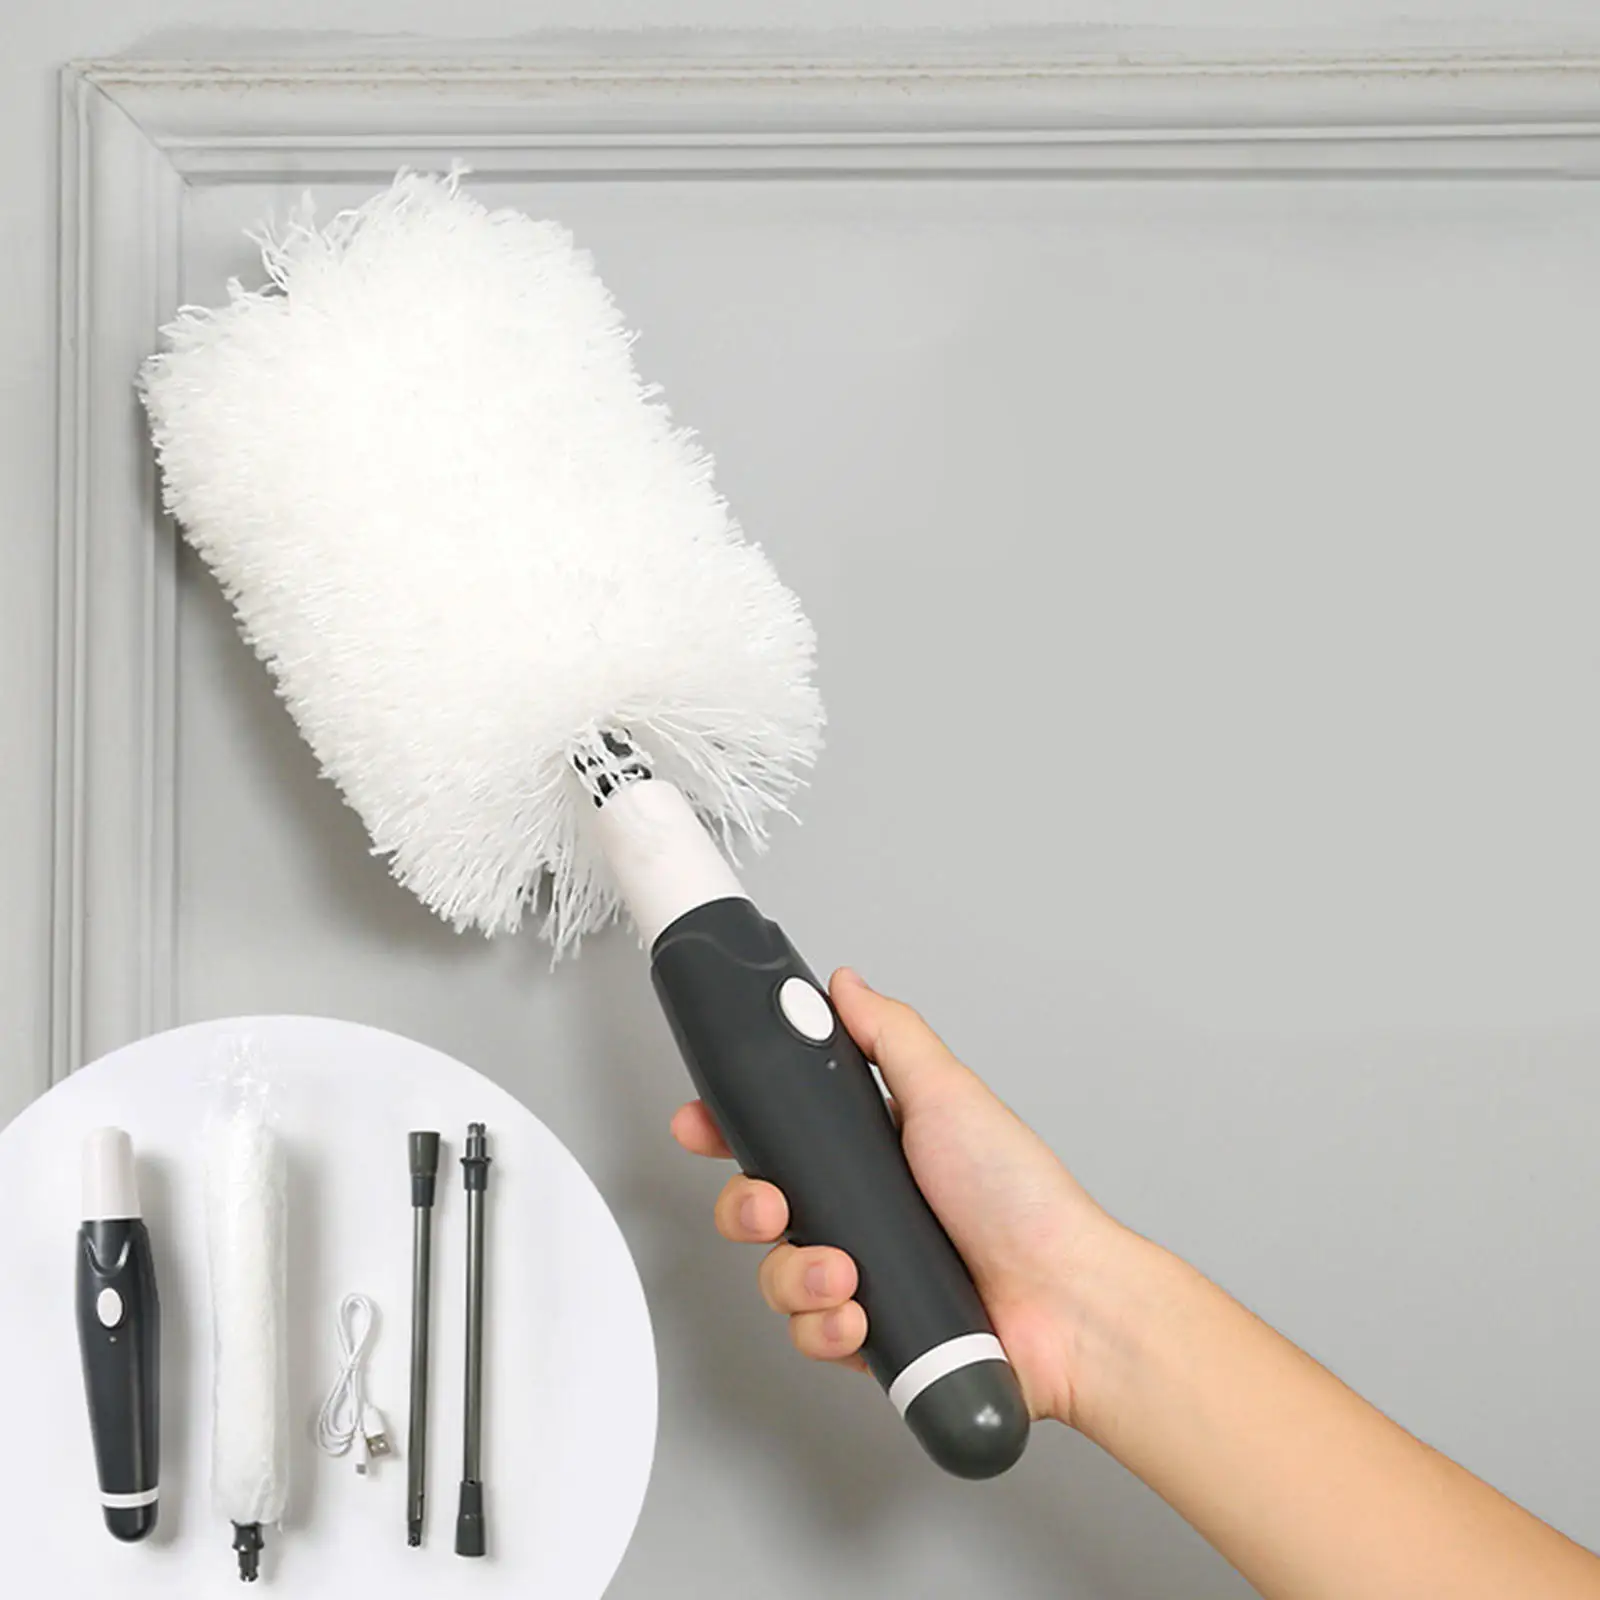 Retractable Dust Brush Telescoping Extension Pole USB Duster for Cleaning High Ceiling Household Brush for Appliances Furniture